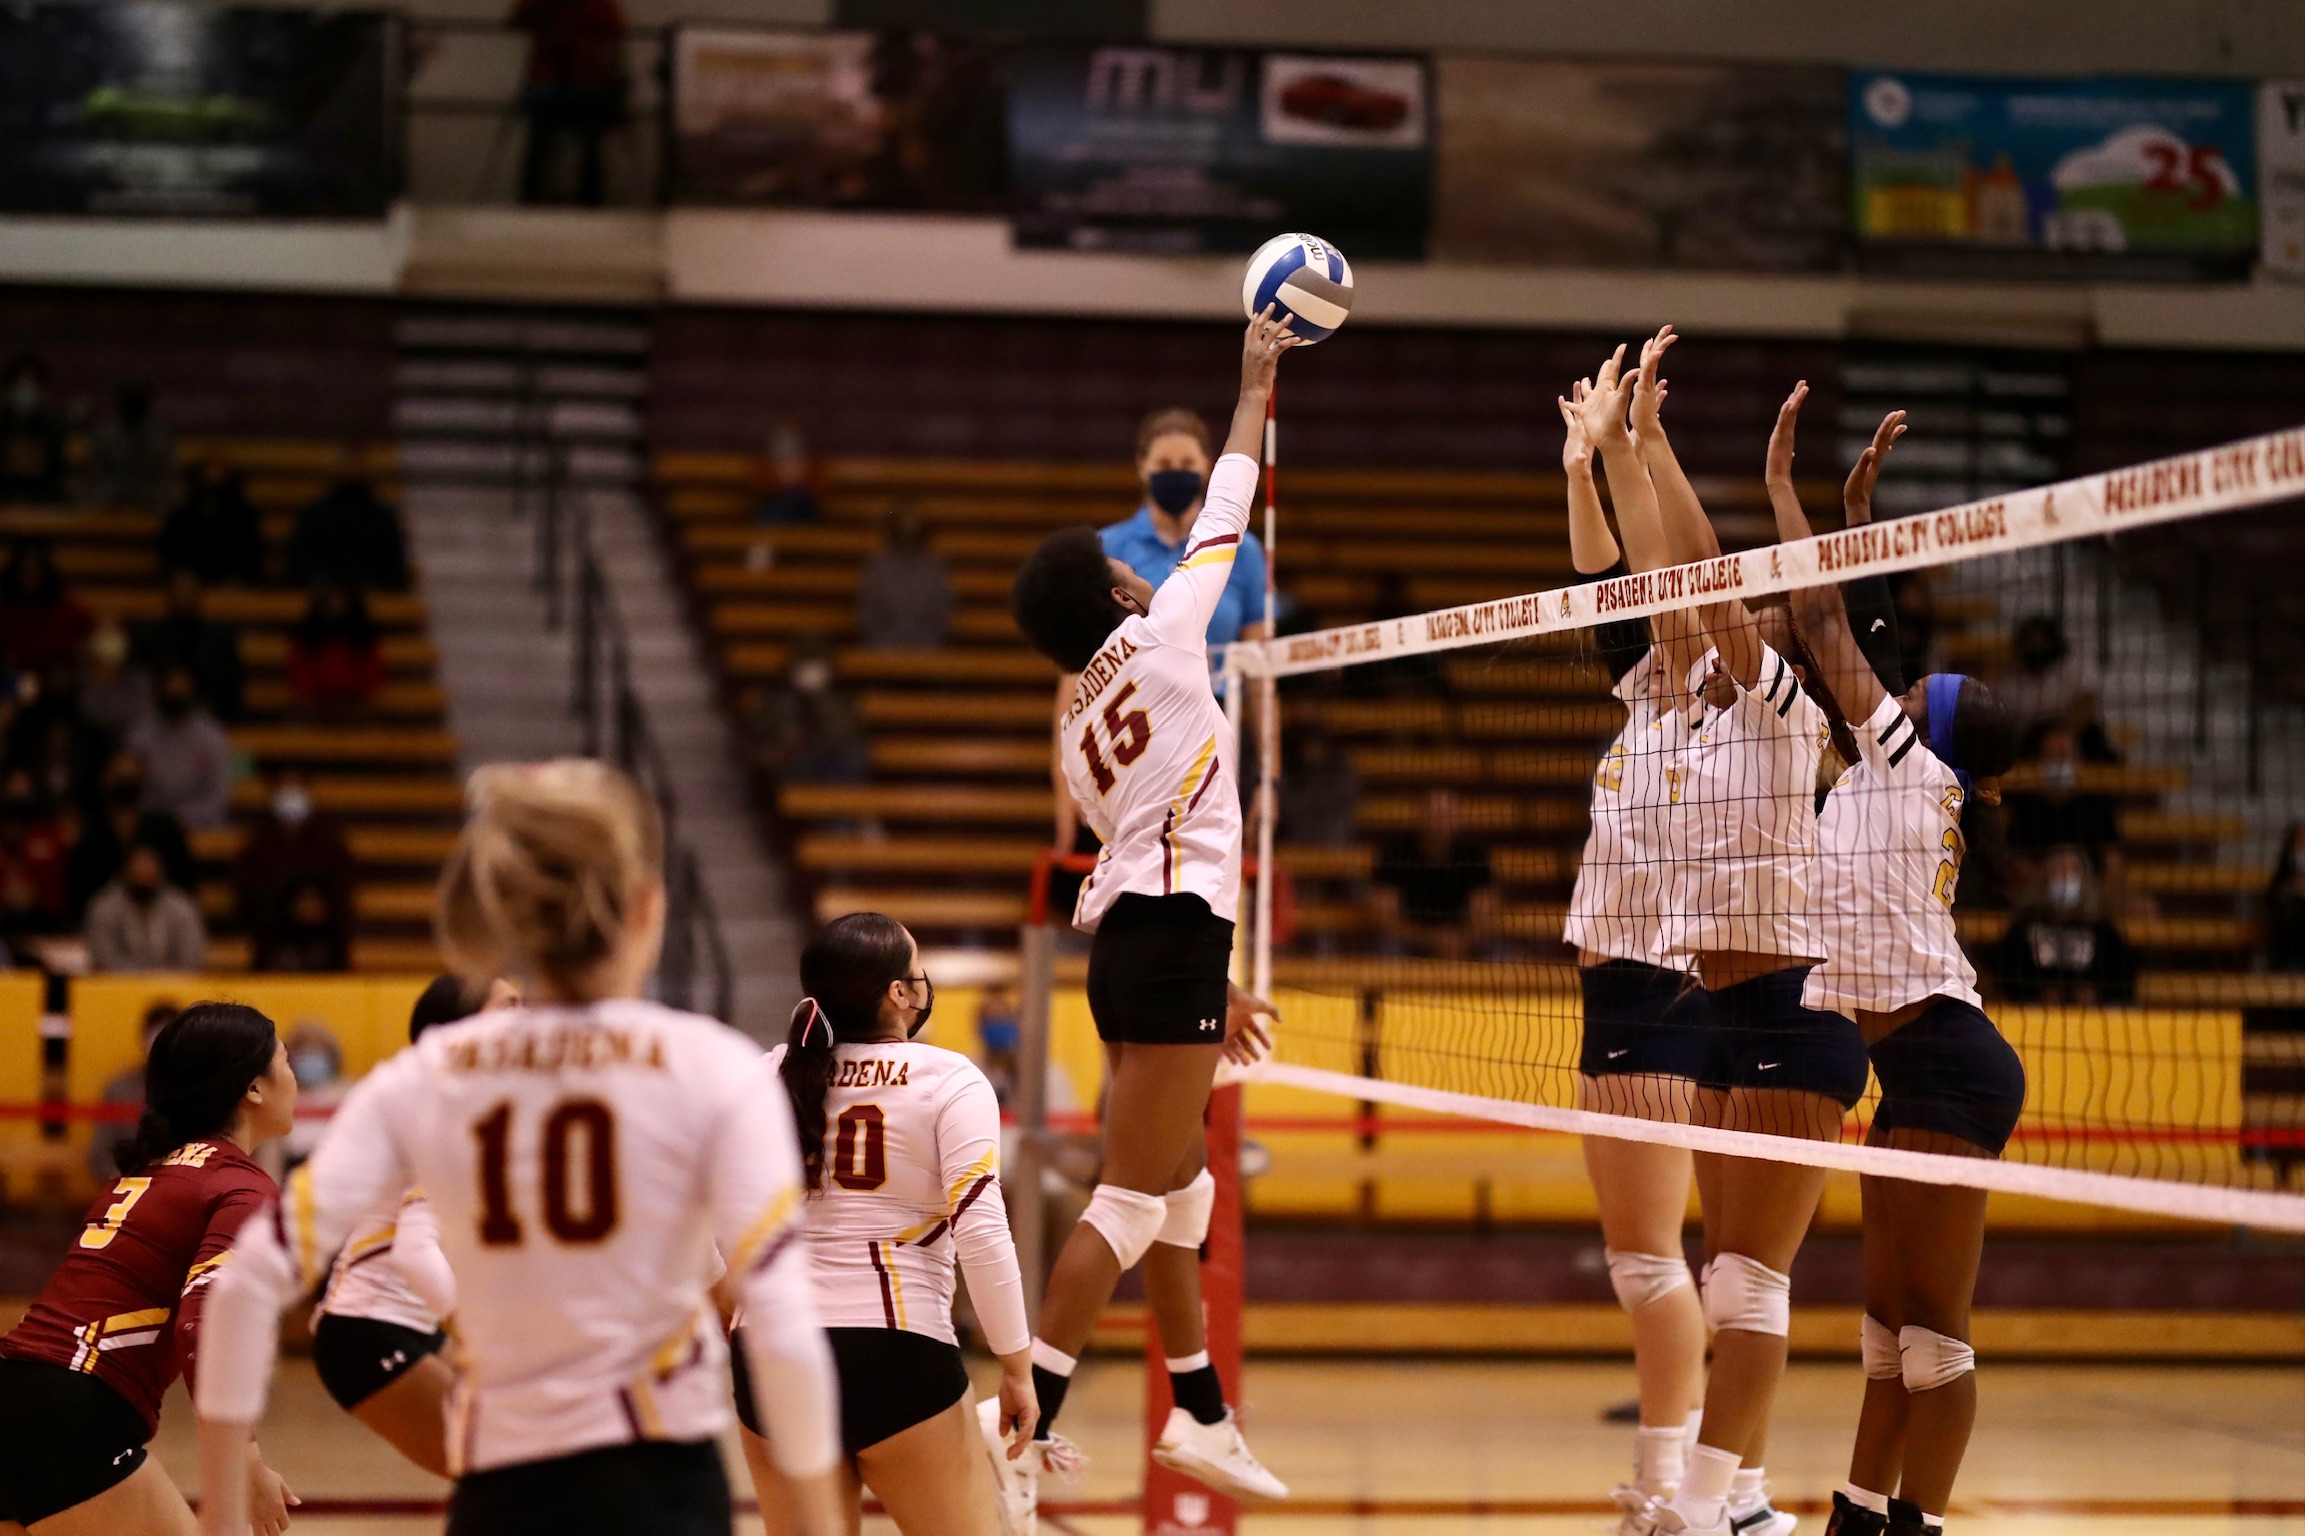 College of the Canyons put up a 3-player blocking wall at times including here v. Lancer Monet Latunde in PCC's Round 1 Regional loss on Tuesday (photo by Michael Watkins).